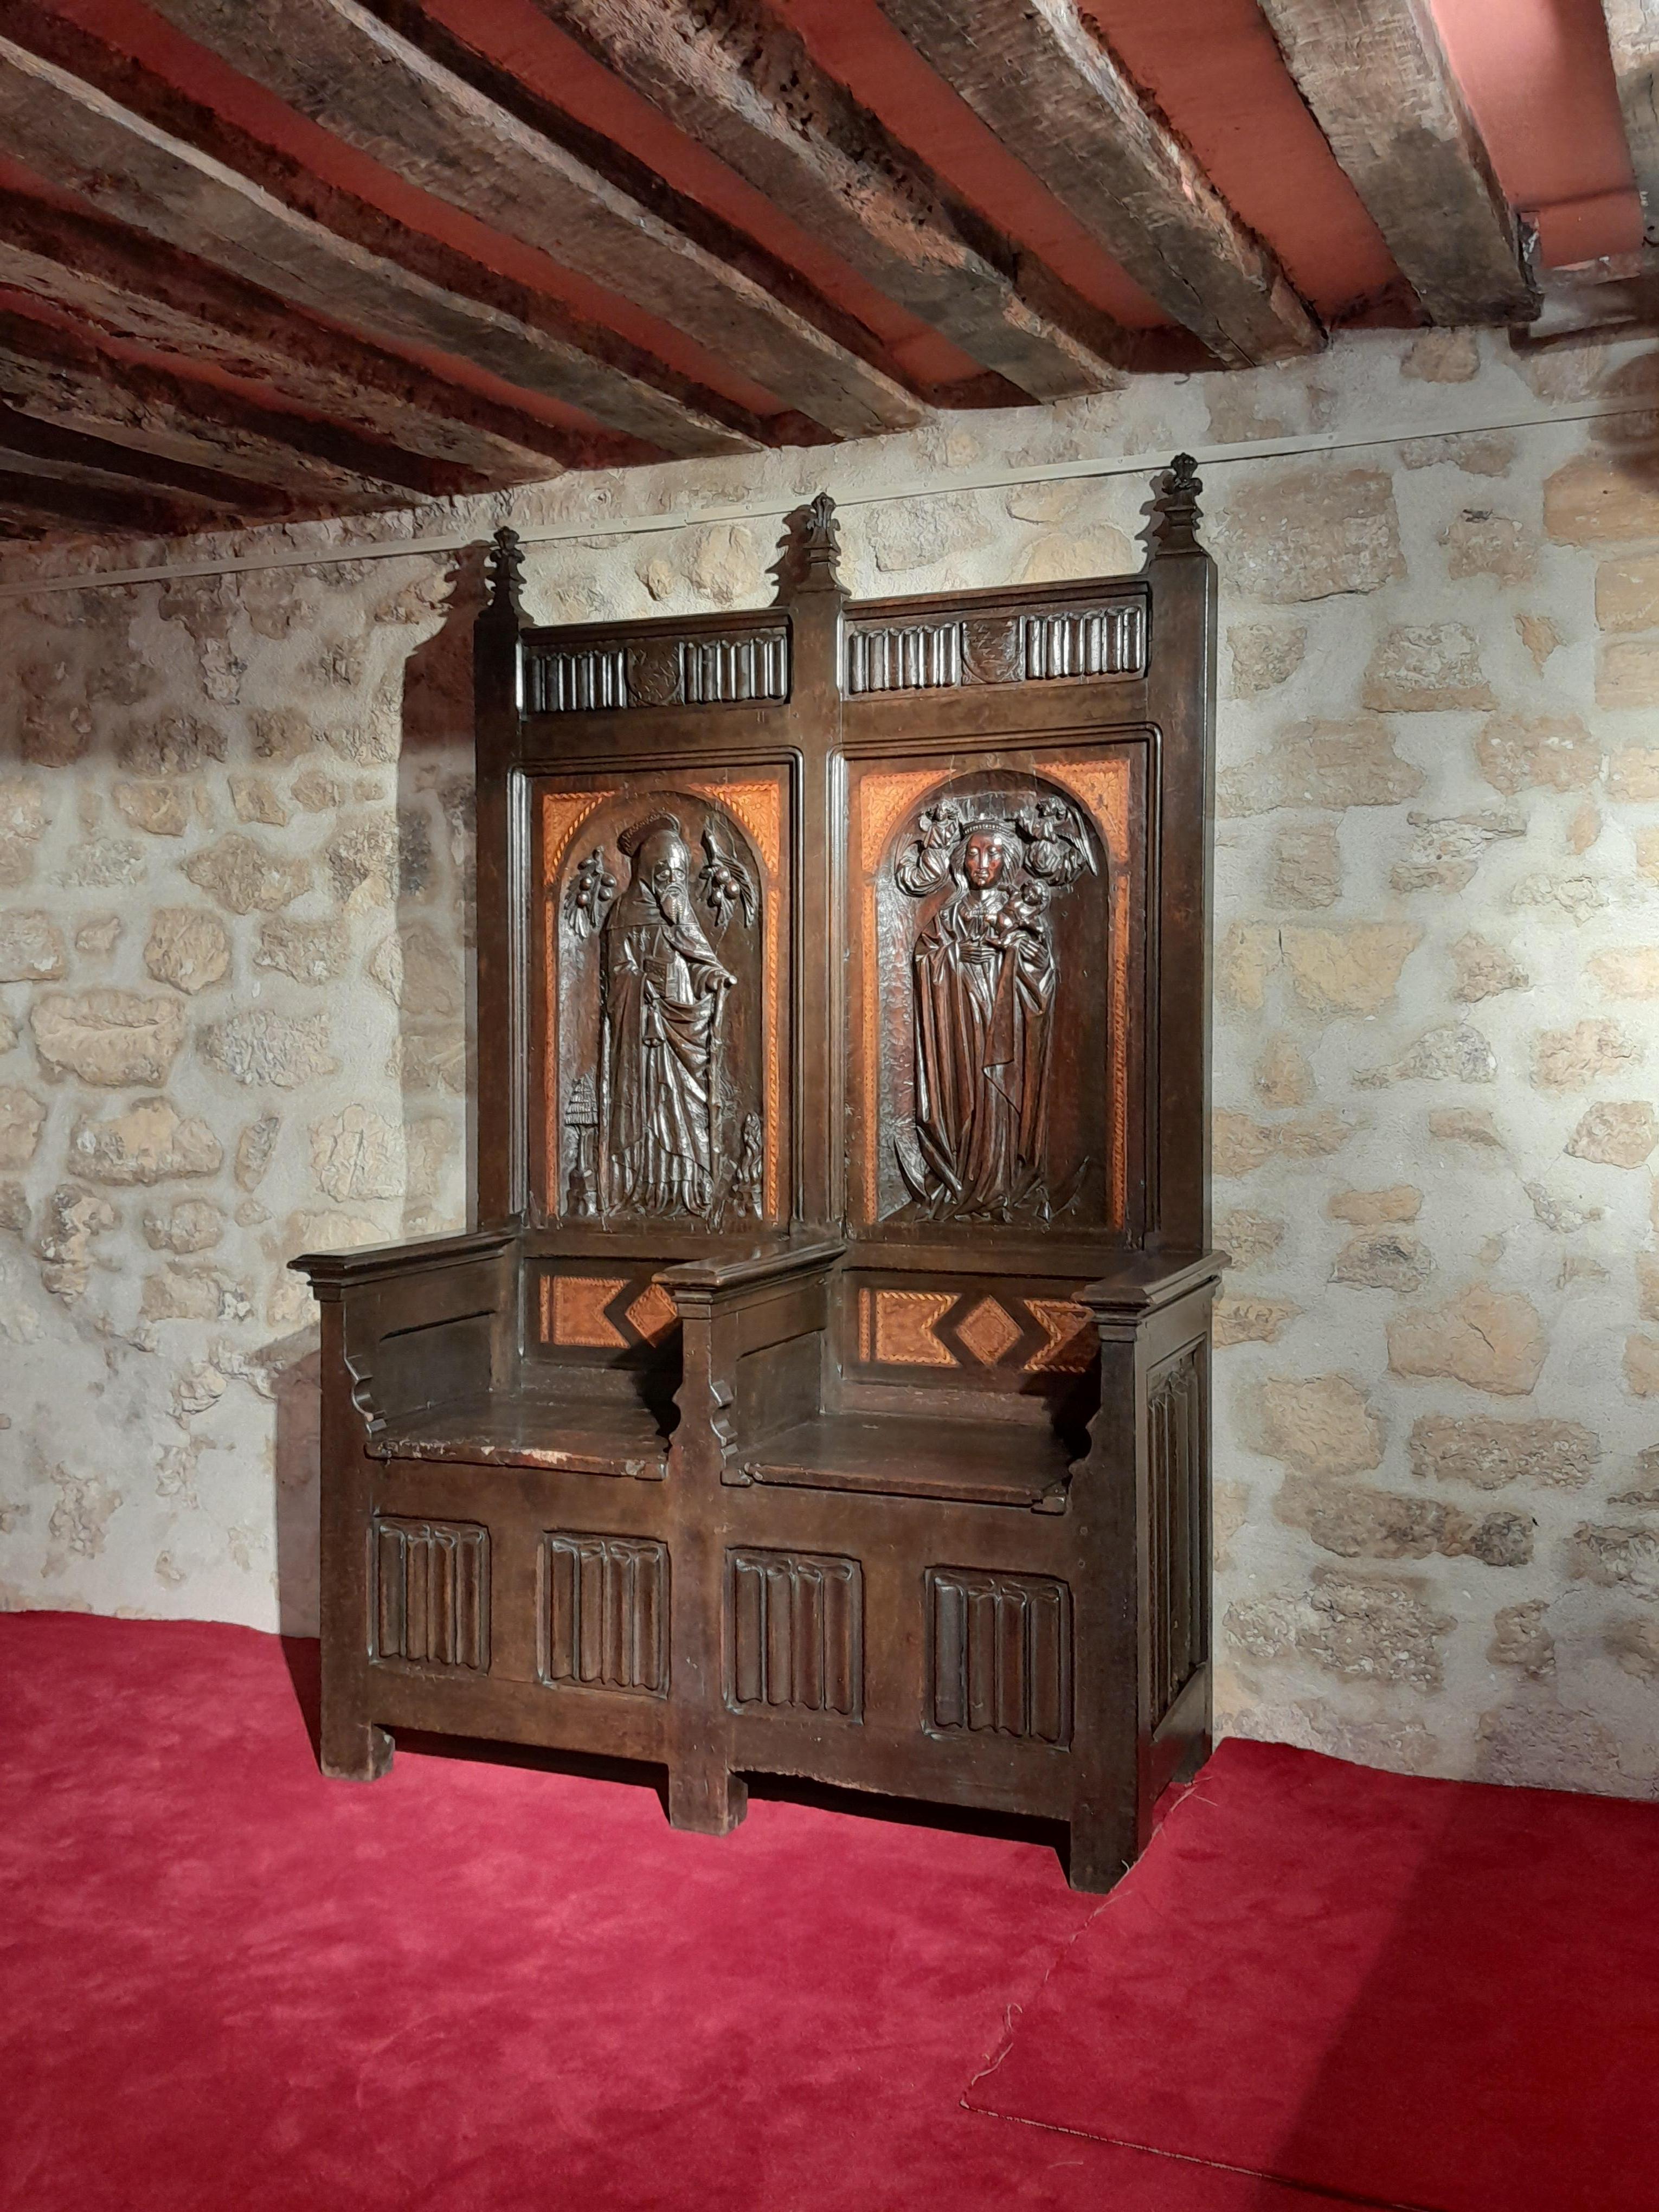 Rare double Cathedra made from walnut wood, sculpted, and inlaid, around 1500

Origin: Southern Germany
Period: Late 15th Century - Early 16th Century

Height: 221cm
Width: 146,5cm
Depth: 60,4cm

Walnut wood and inlaid
Good state of